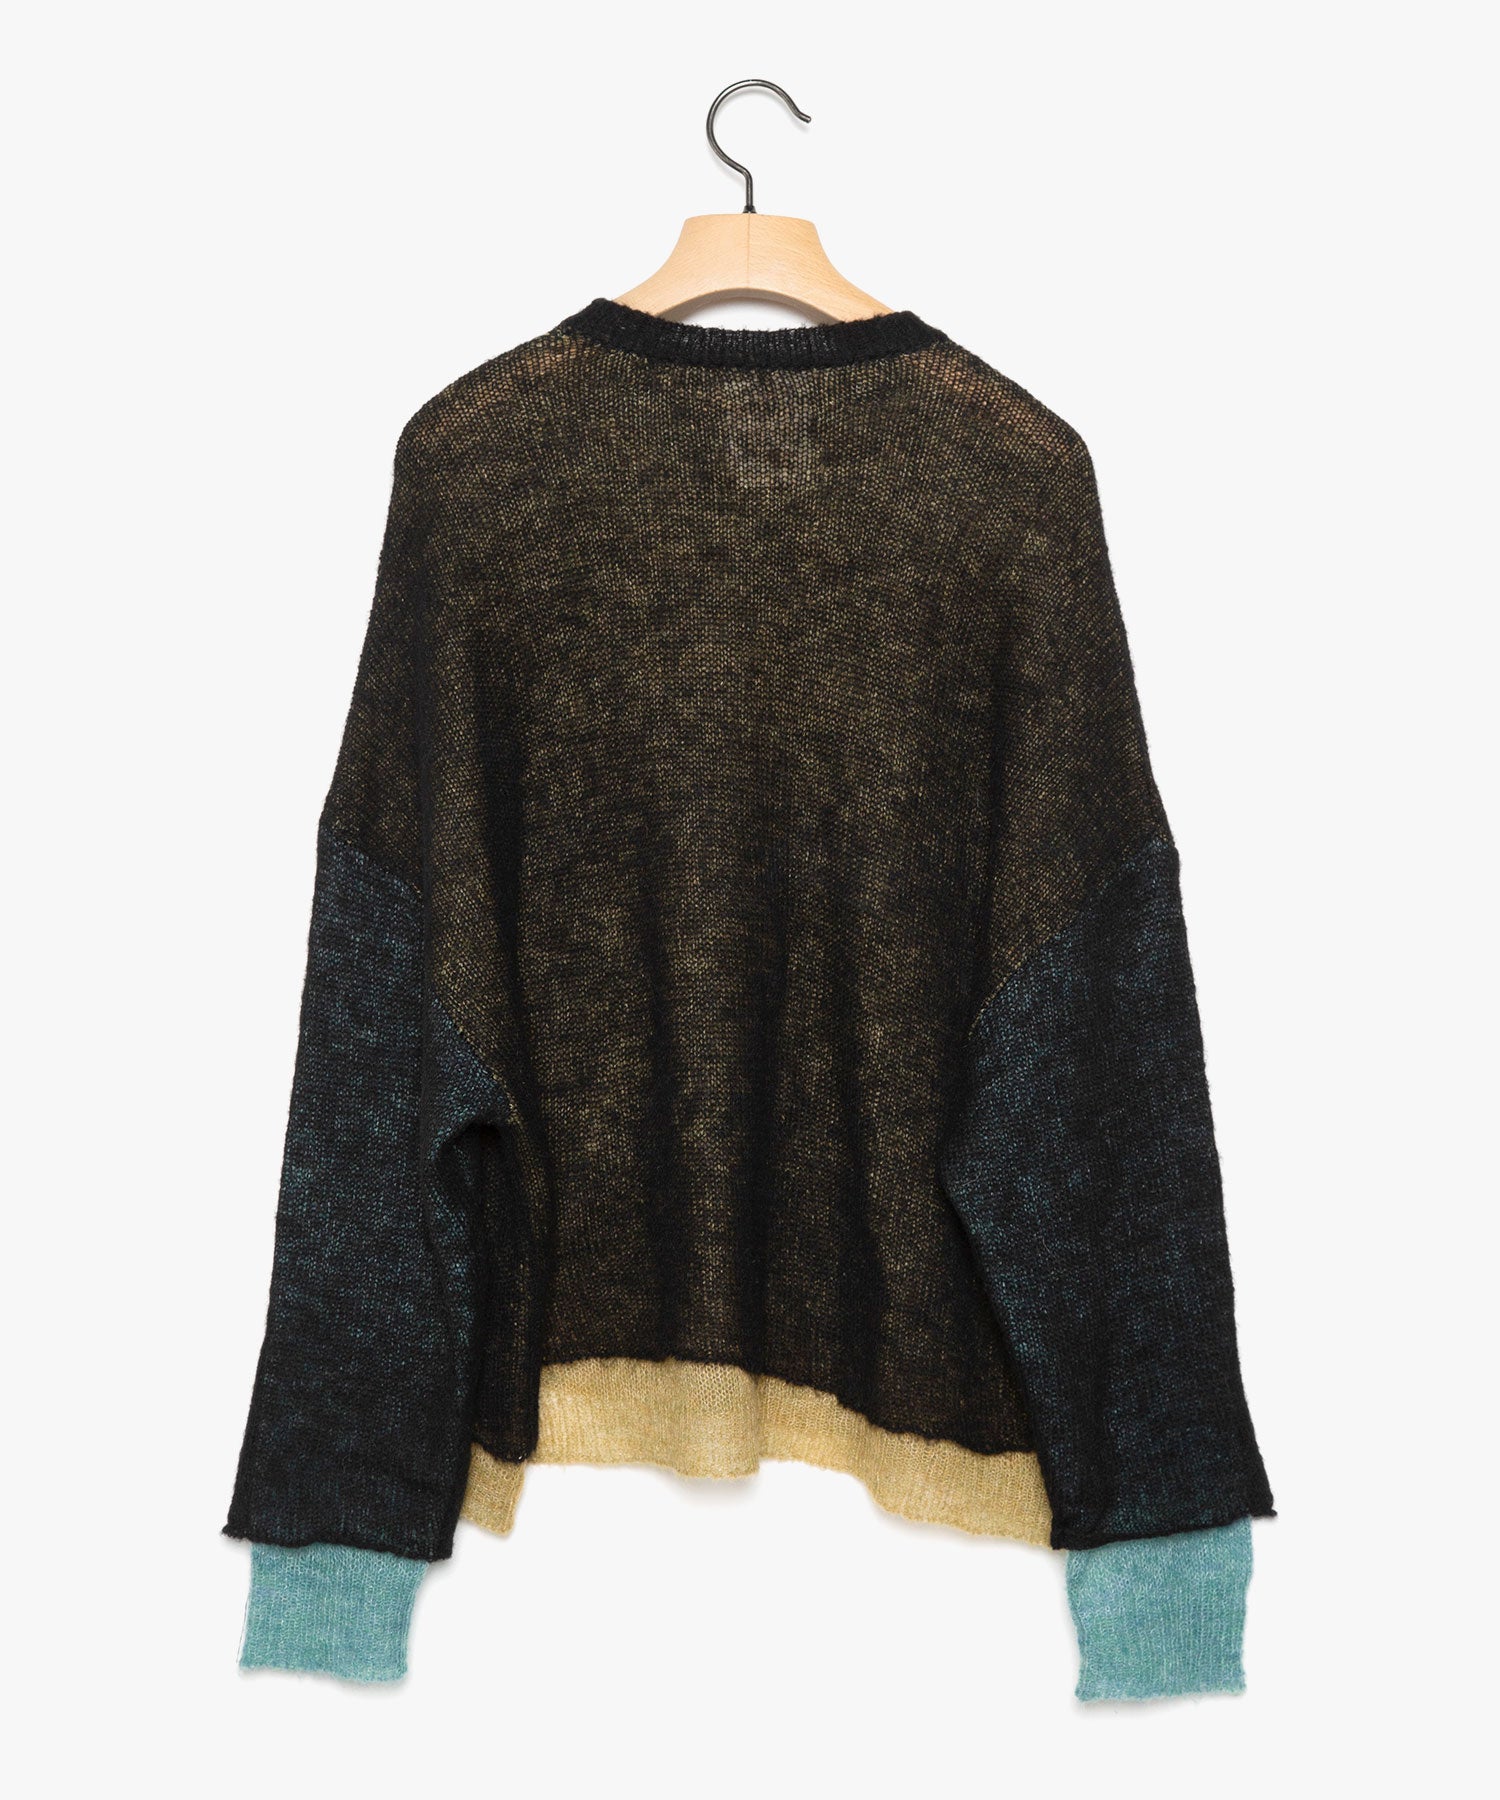 No:SF24AW-11_BLACK | Name:Mohair Color Layer Knit Sweater | Color:Black【STOF_ストフ】【入荷予定アイテム・入荷連絡可能】